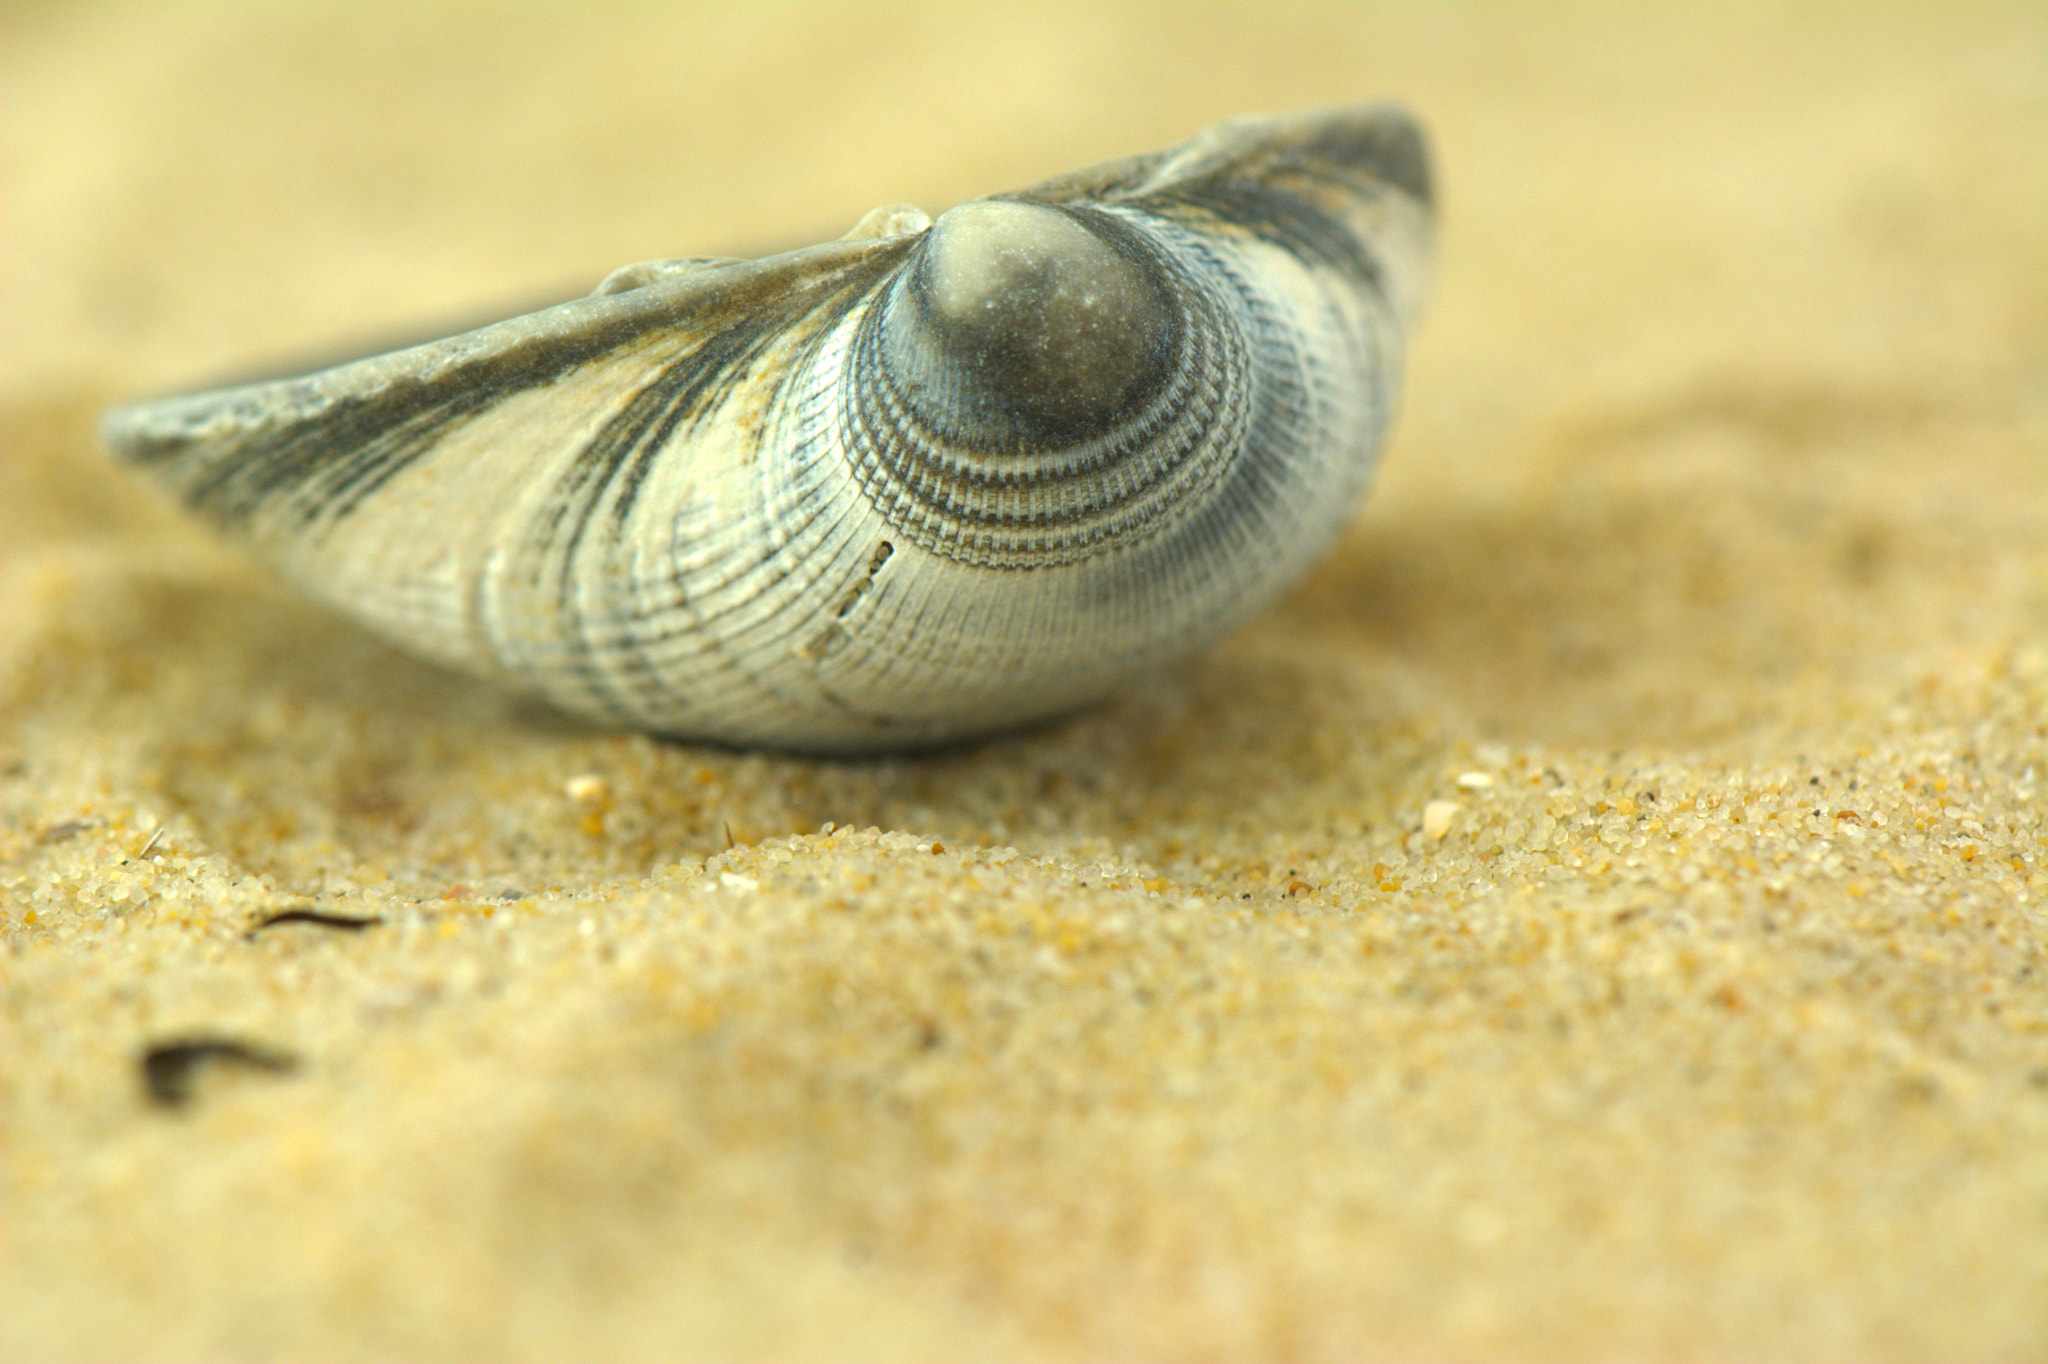 Nikon D7100 sample photo. One day a shell photography